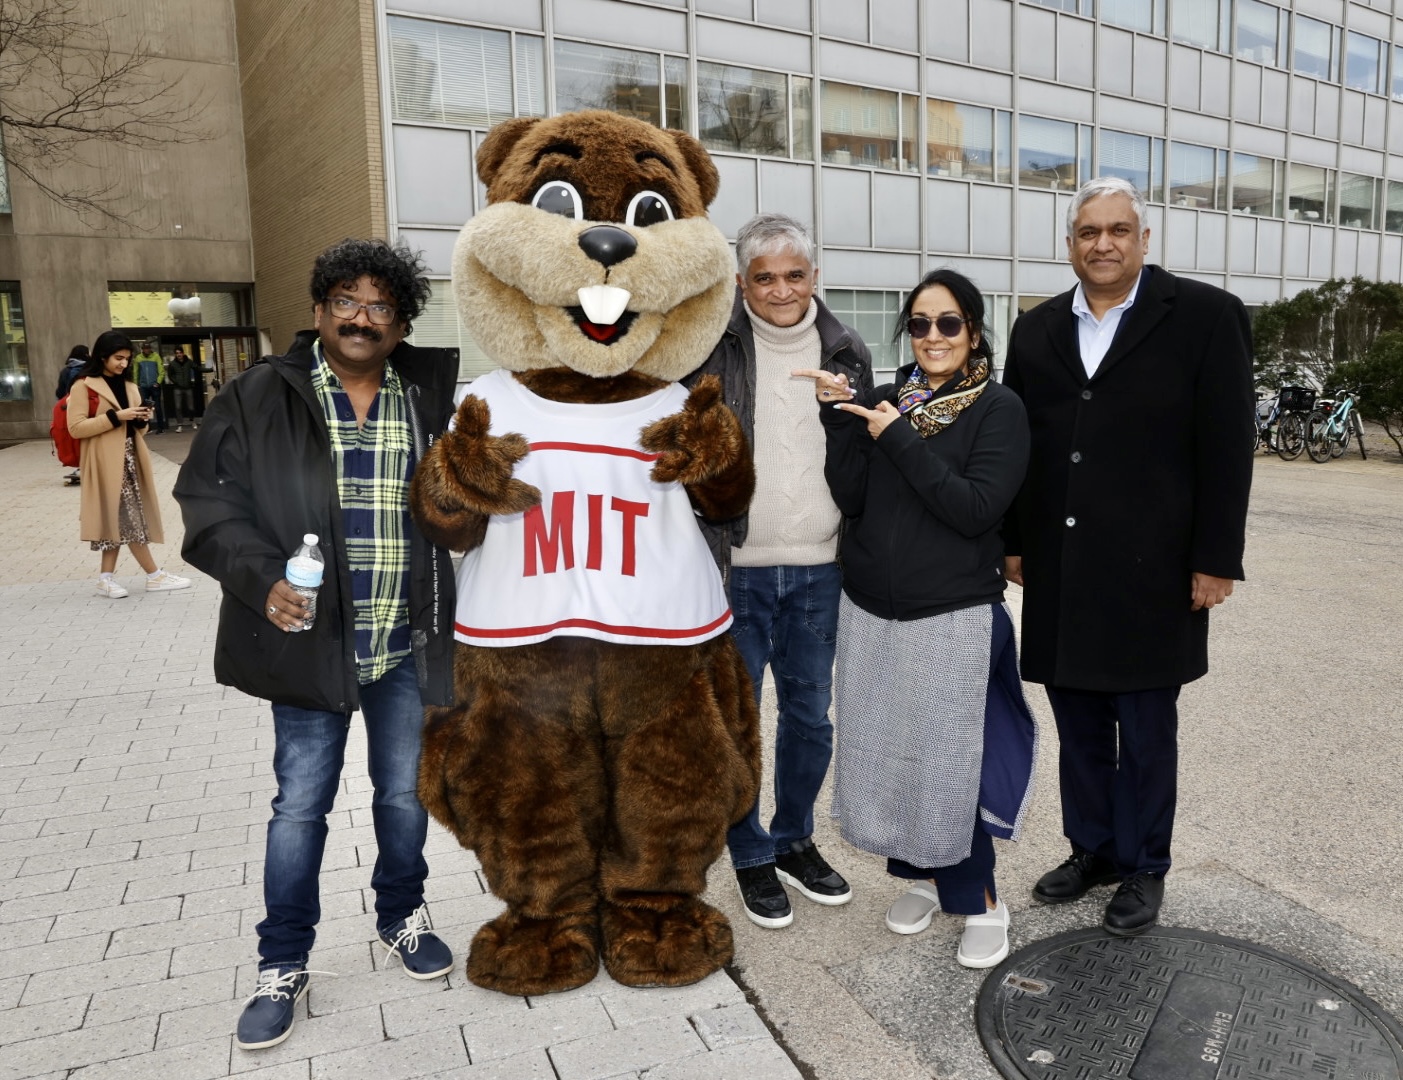 MIT School of Engineering on X: Fresh off his Best Original Song Oscar win  for “Naatu Naatu” on Sunday, Chandrabose (@boselyricist) joined Dean  Anantha Chandrakasan today for a tour of MIT's campus